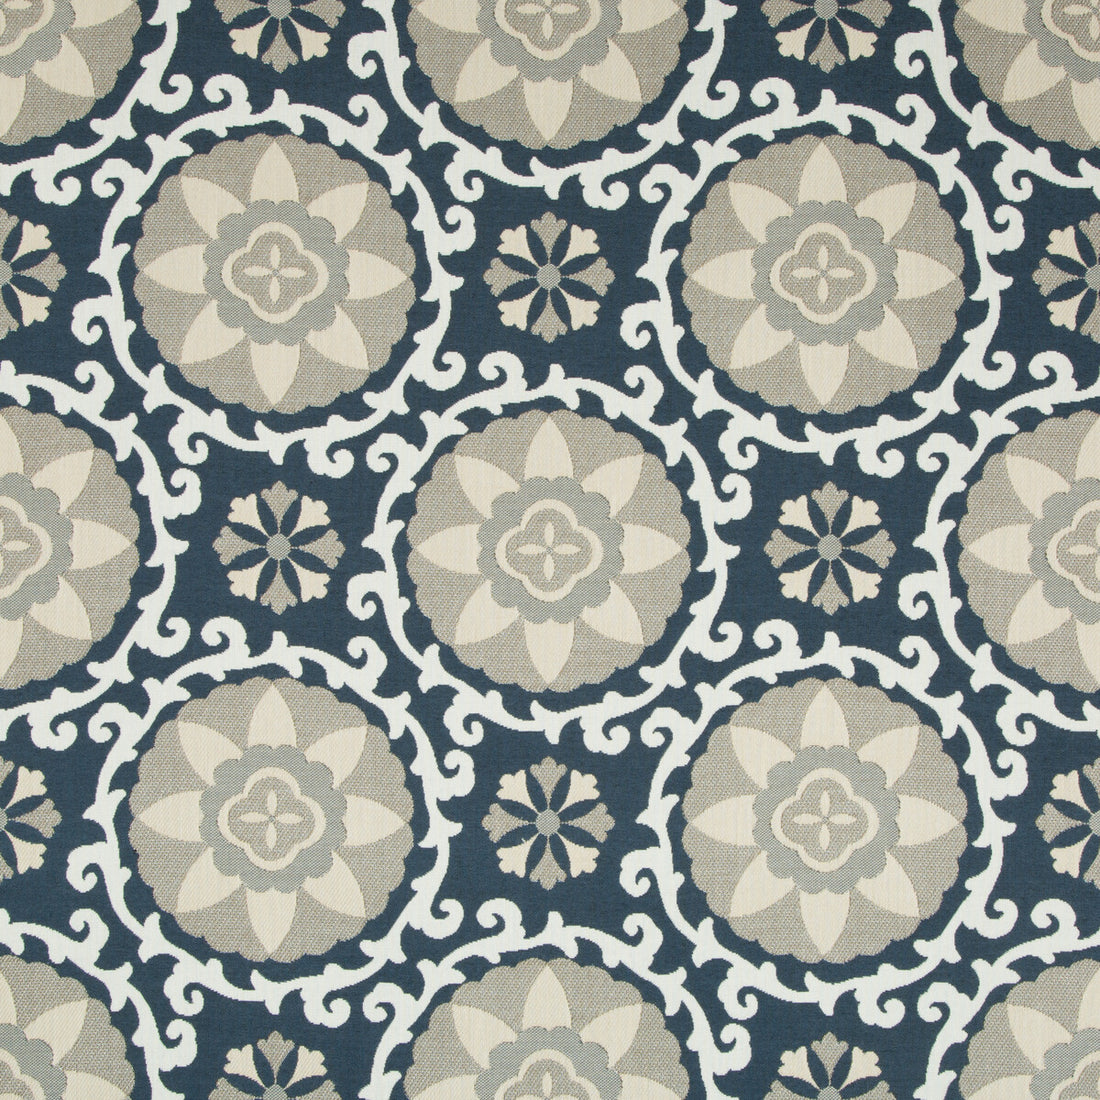 Exotic Suzani fabric in indigo color - pattern 31969.1516.0 - by Kravet Design in the Oceania Indoor Outdoor collection